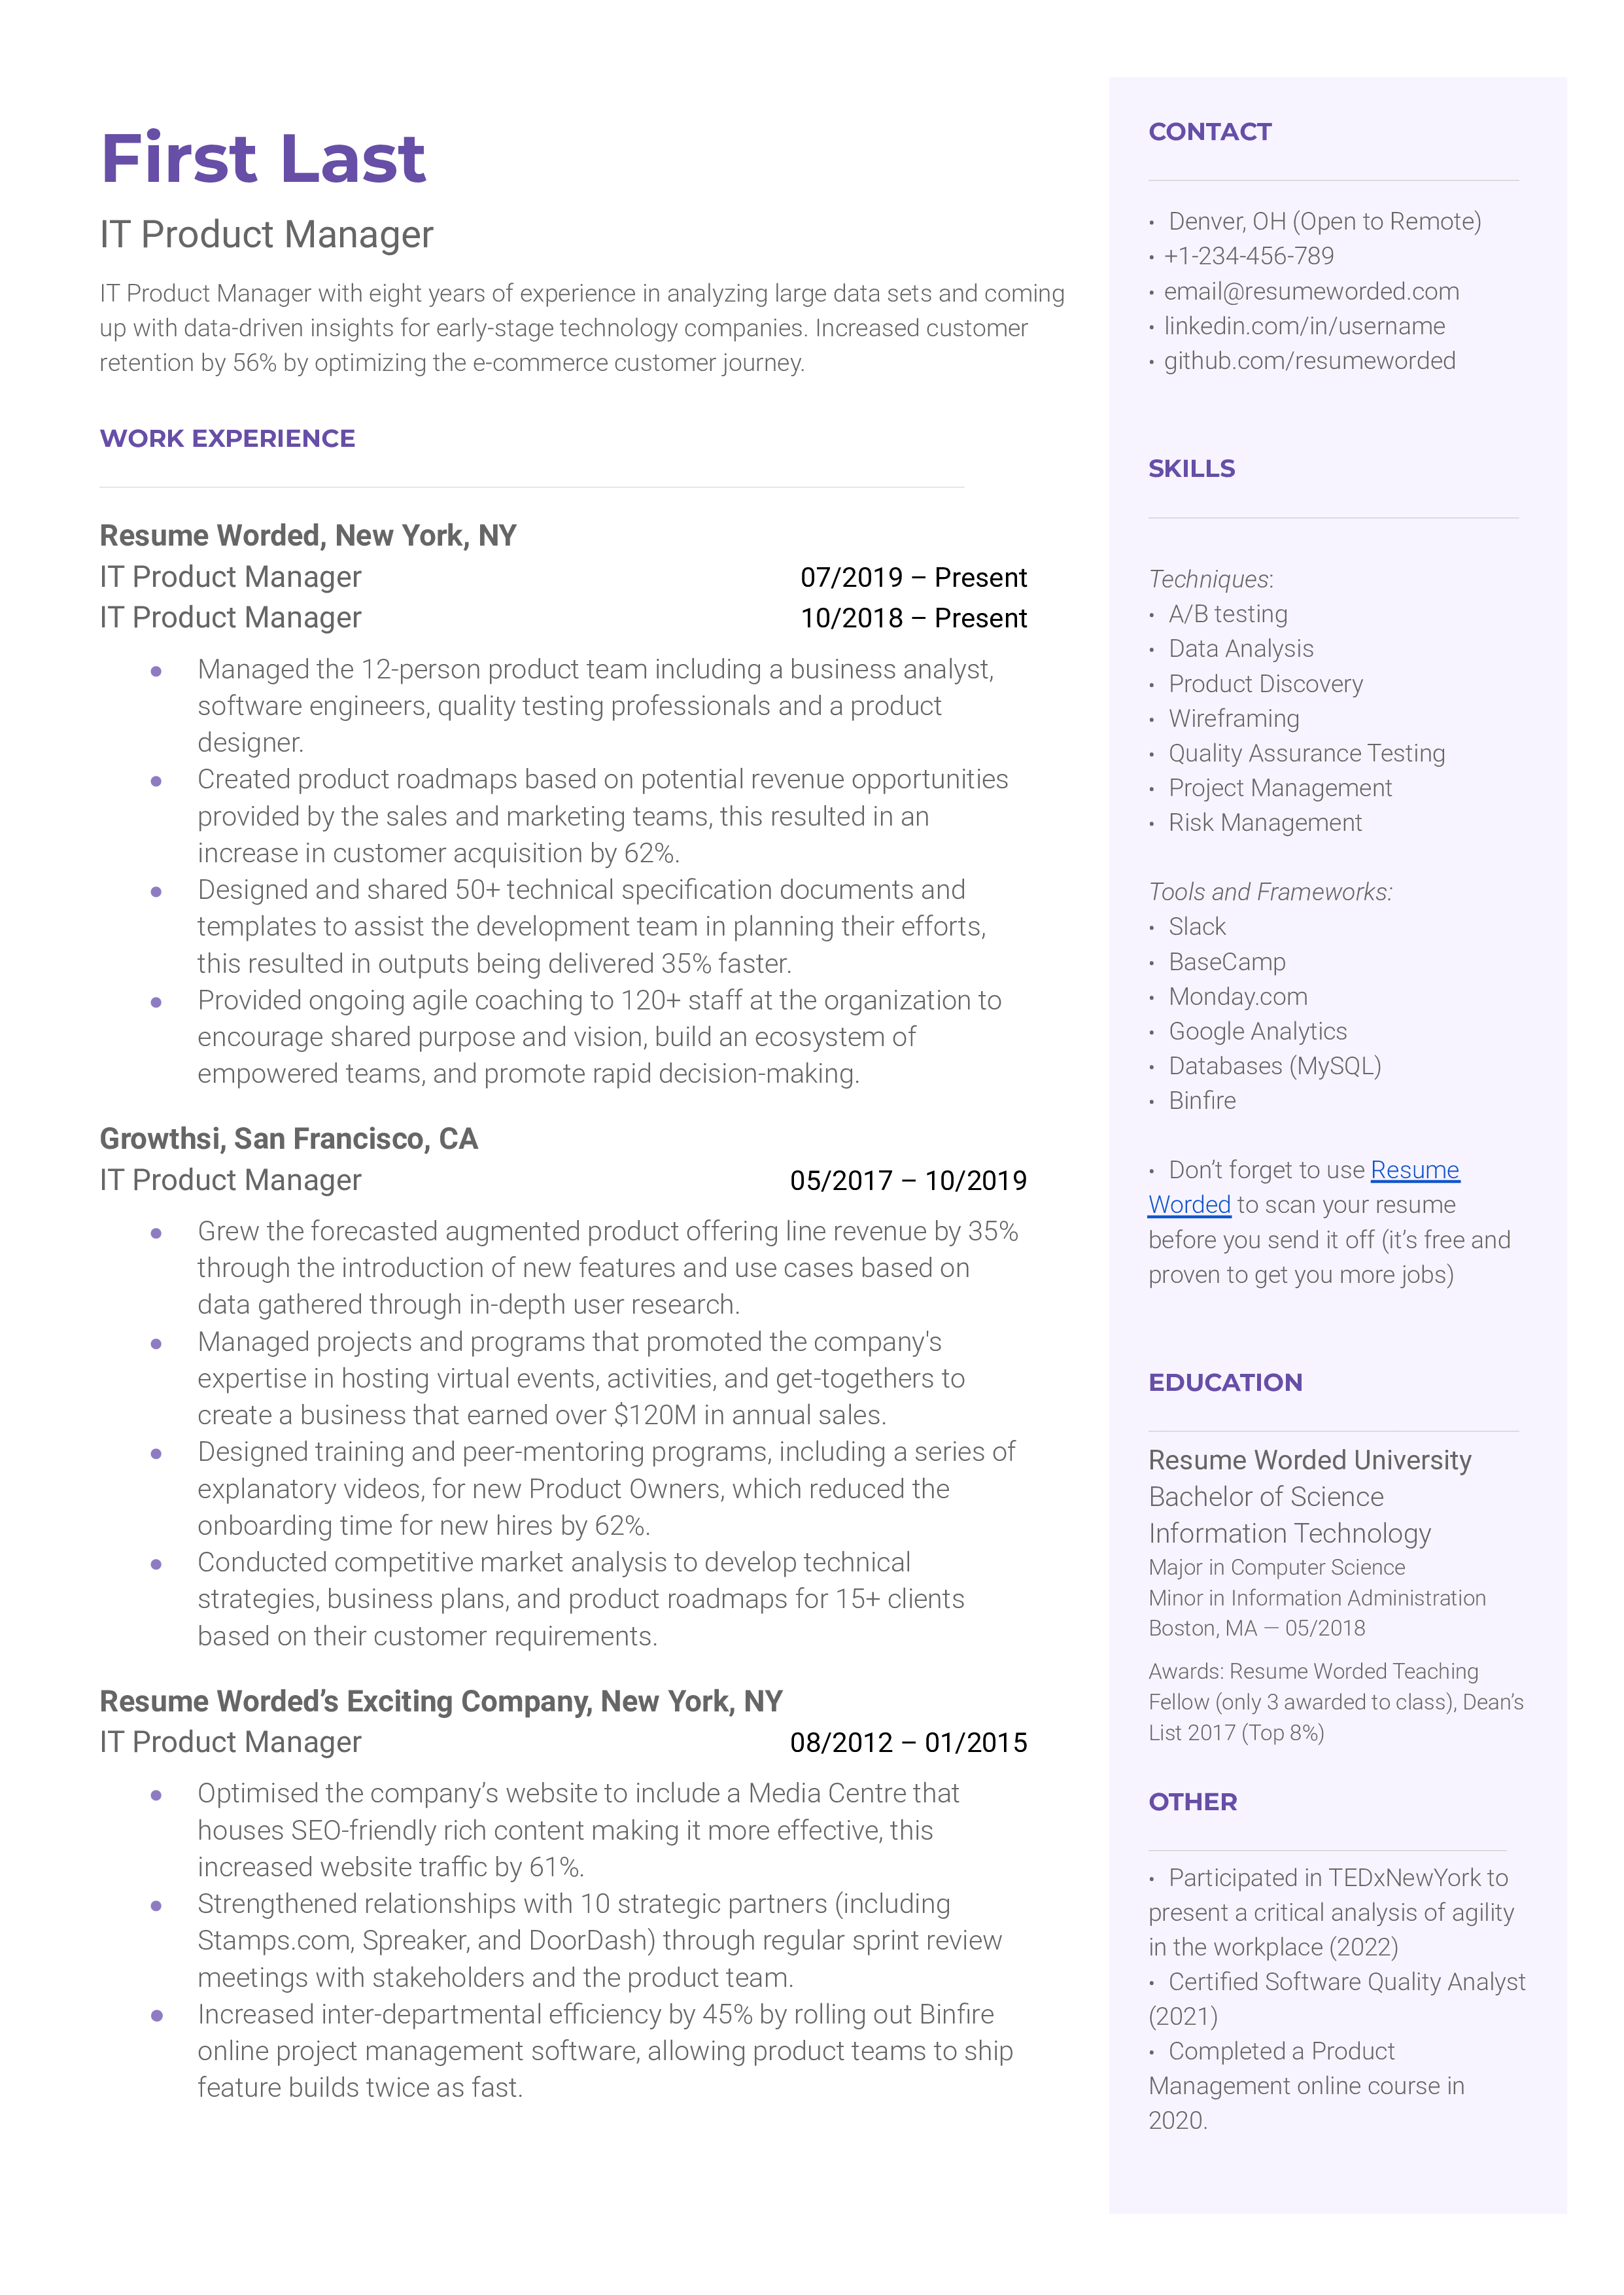 IT Product Manager Resume Sample